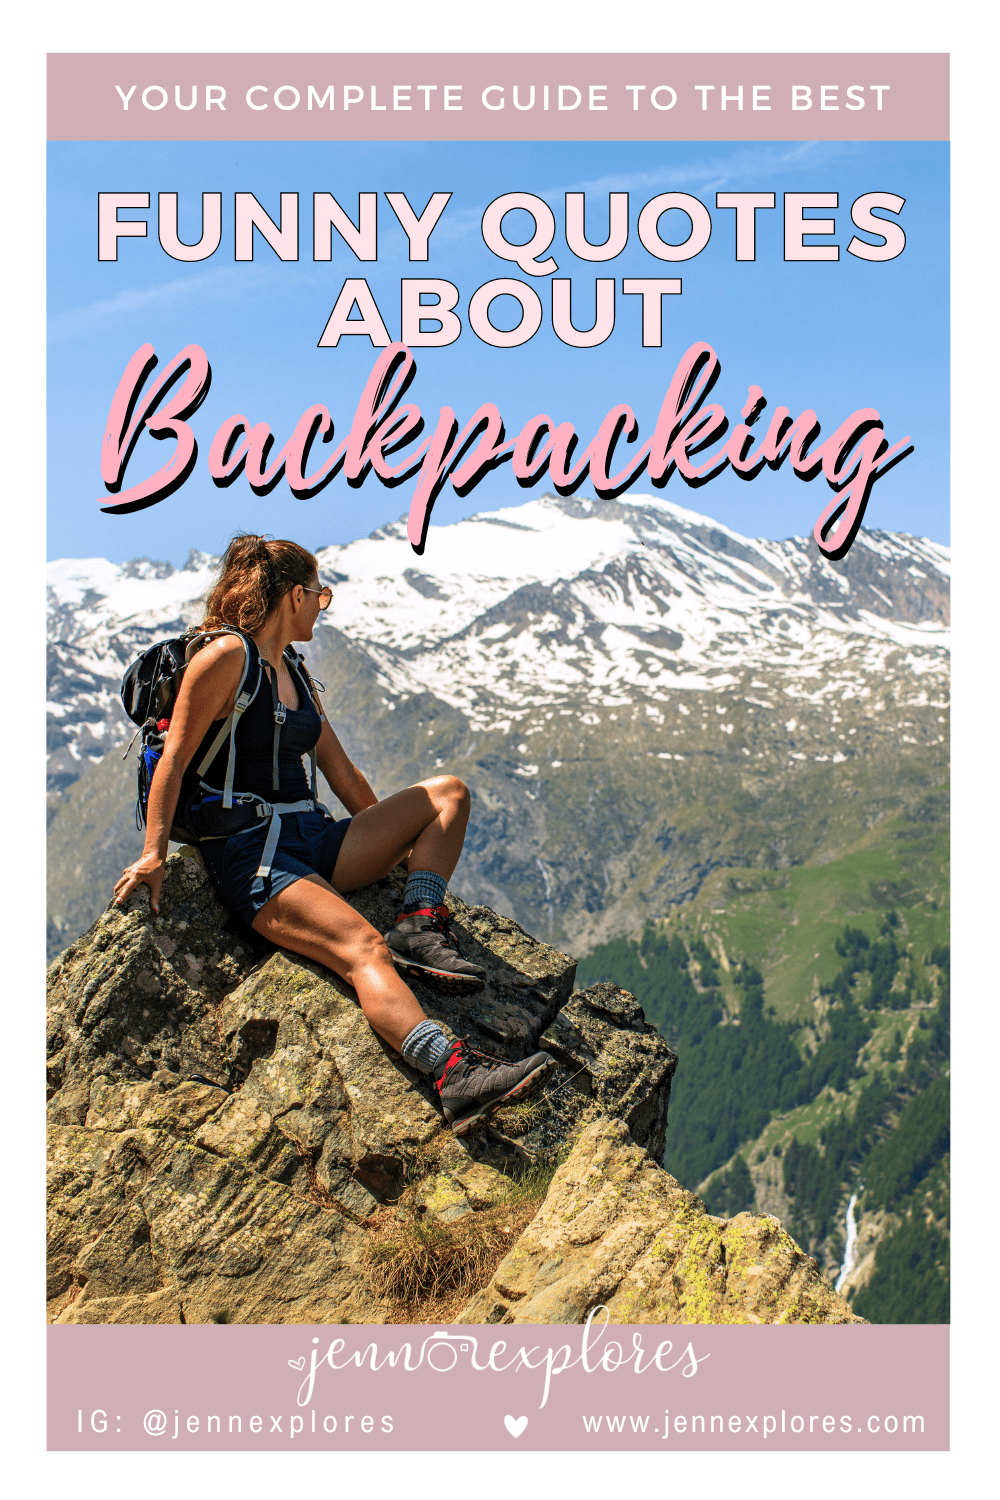 funny backpacking quotes